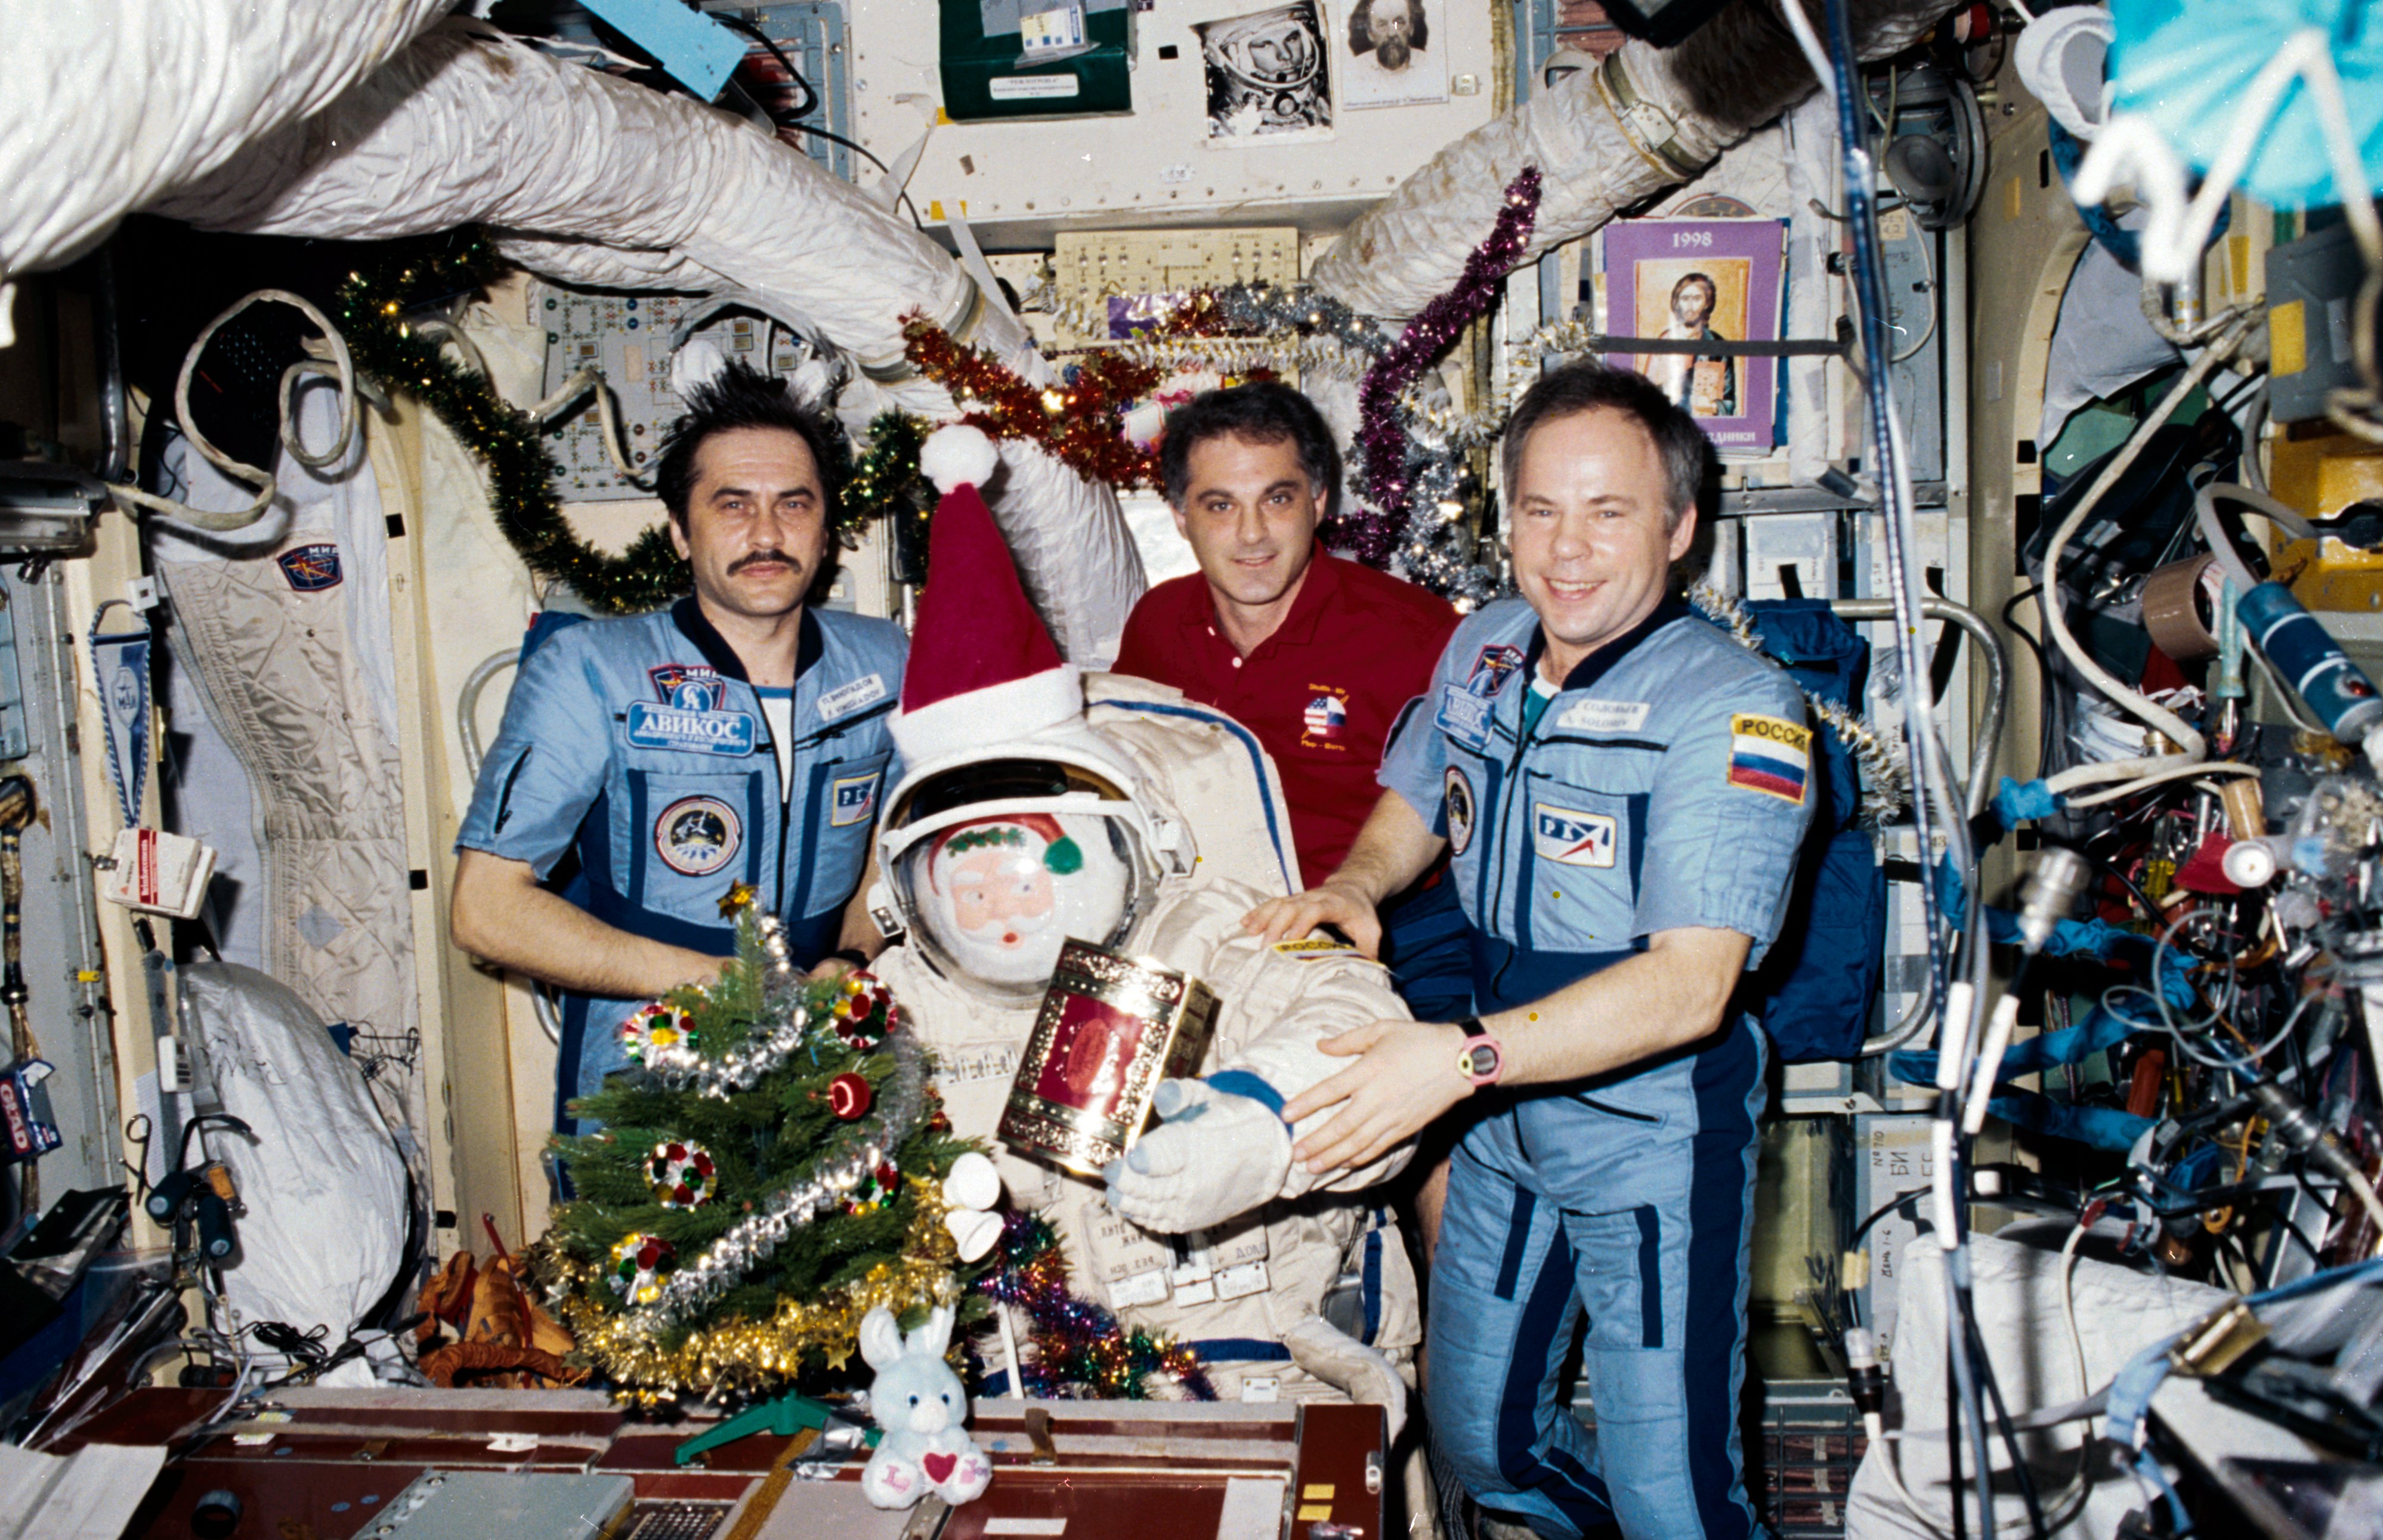 Dave Wolf (center) was the second and last American astronaut to celebrate Christmas aboard Russia's Mir space station in 1997. He spent the festive period alongside cosmonauts Anatoli Solovyov (right) and Pavel Vinogradov. Photo Credit: NASA